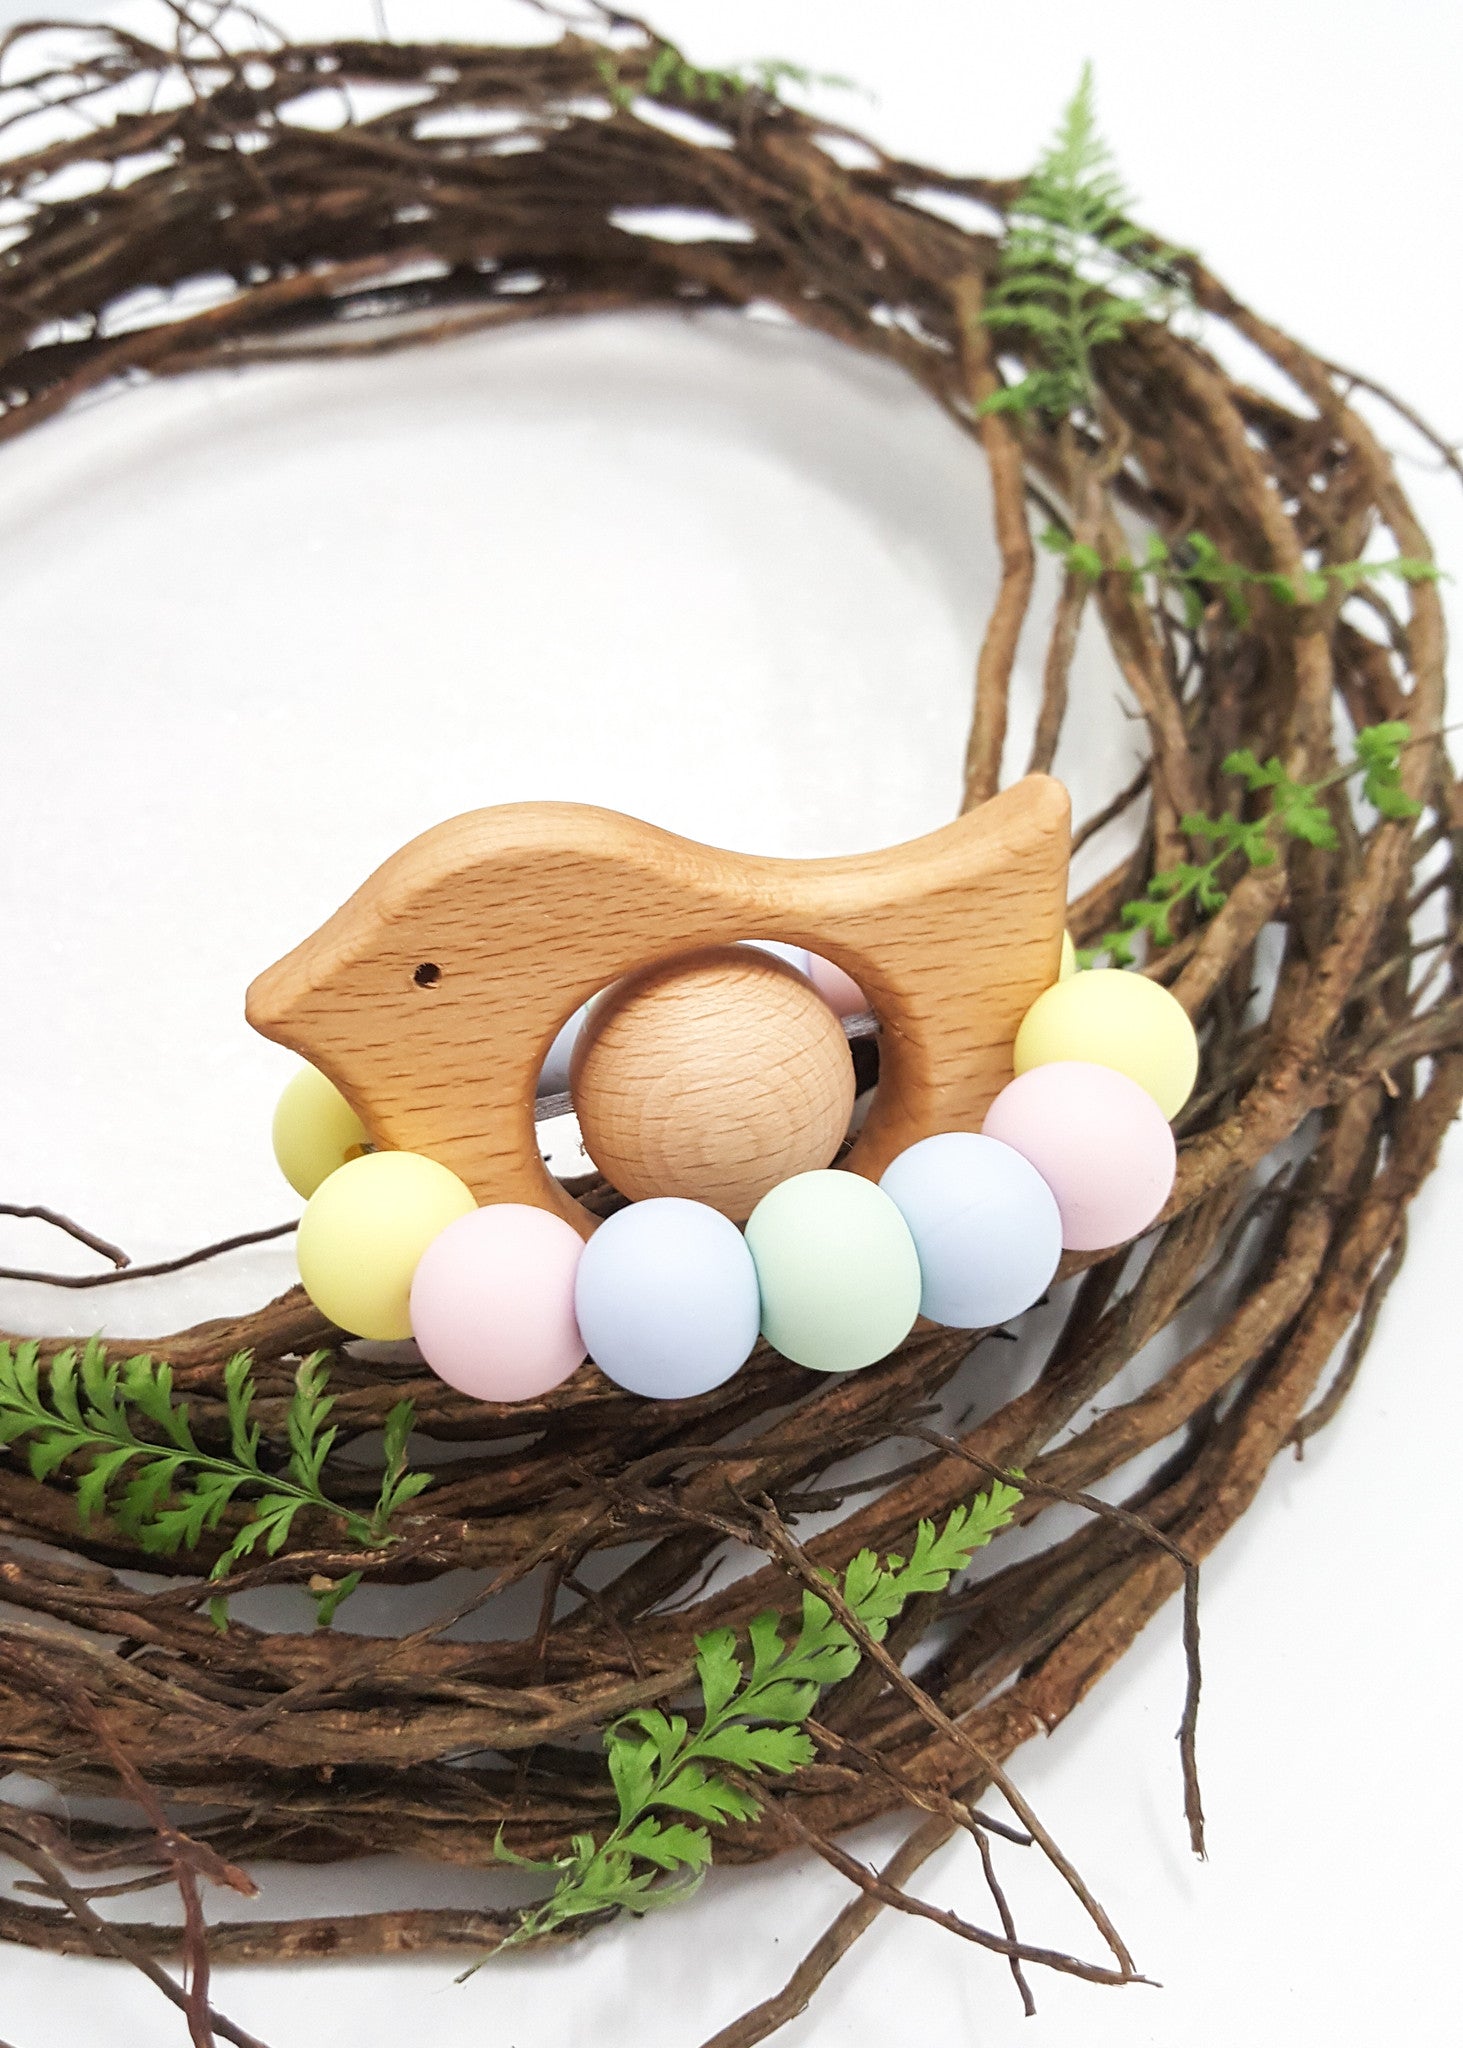 The Rattle 'n' Tweet Teething & Sensory Toy features a Large Beech timber bead which softly rattles on the the little timber bird when shaken.  An exclusive and original design to BowerBird Creations,these little birds in a nest boast a variety of colours shapes & Textures - Rattle 'n' Tweet Teething Toy - Bowerbird Creations